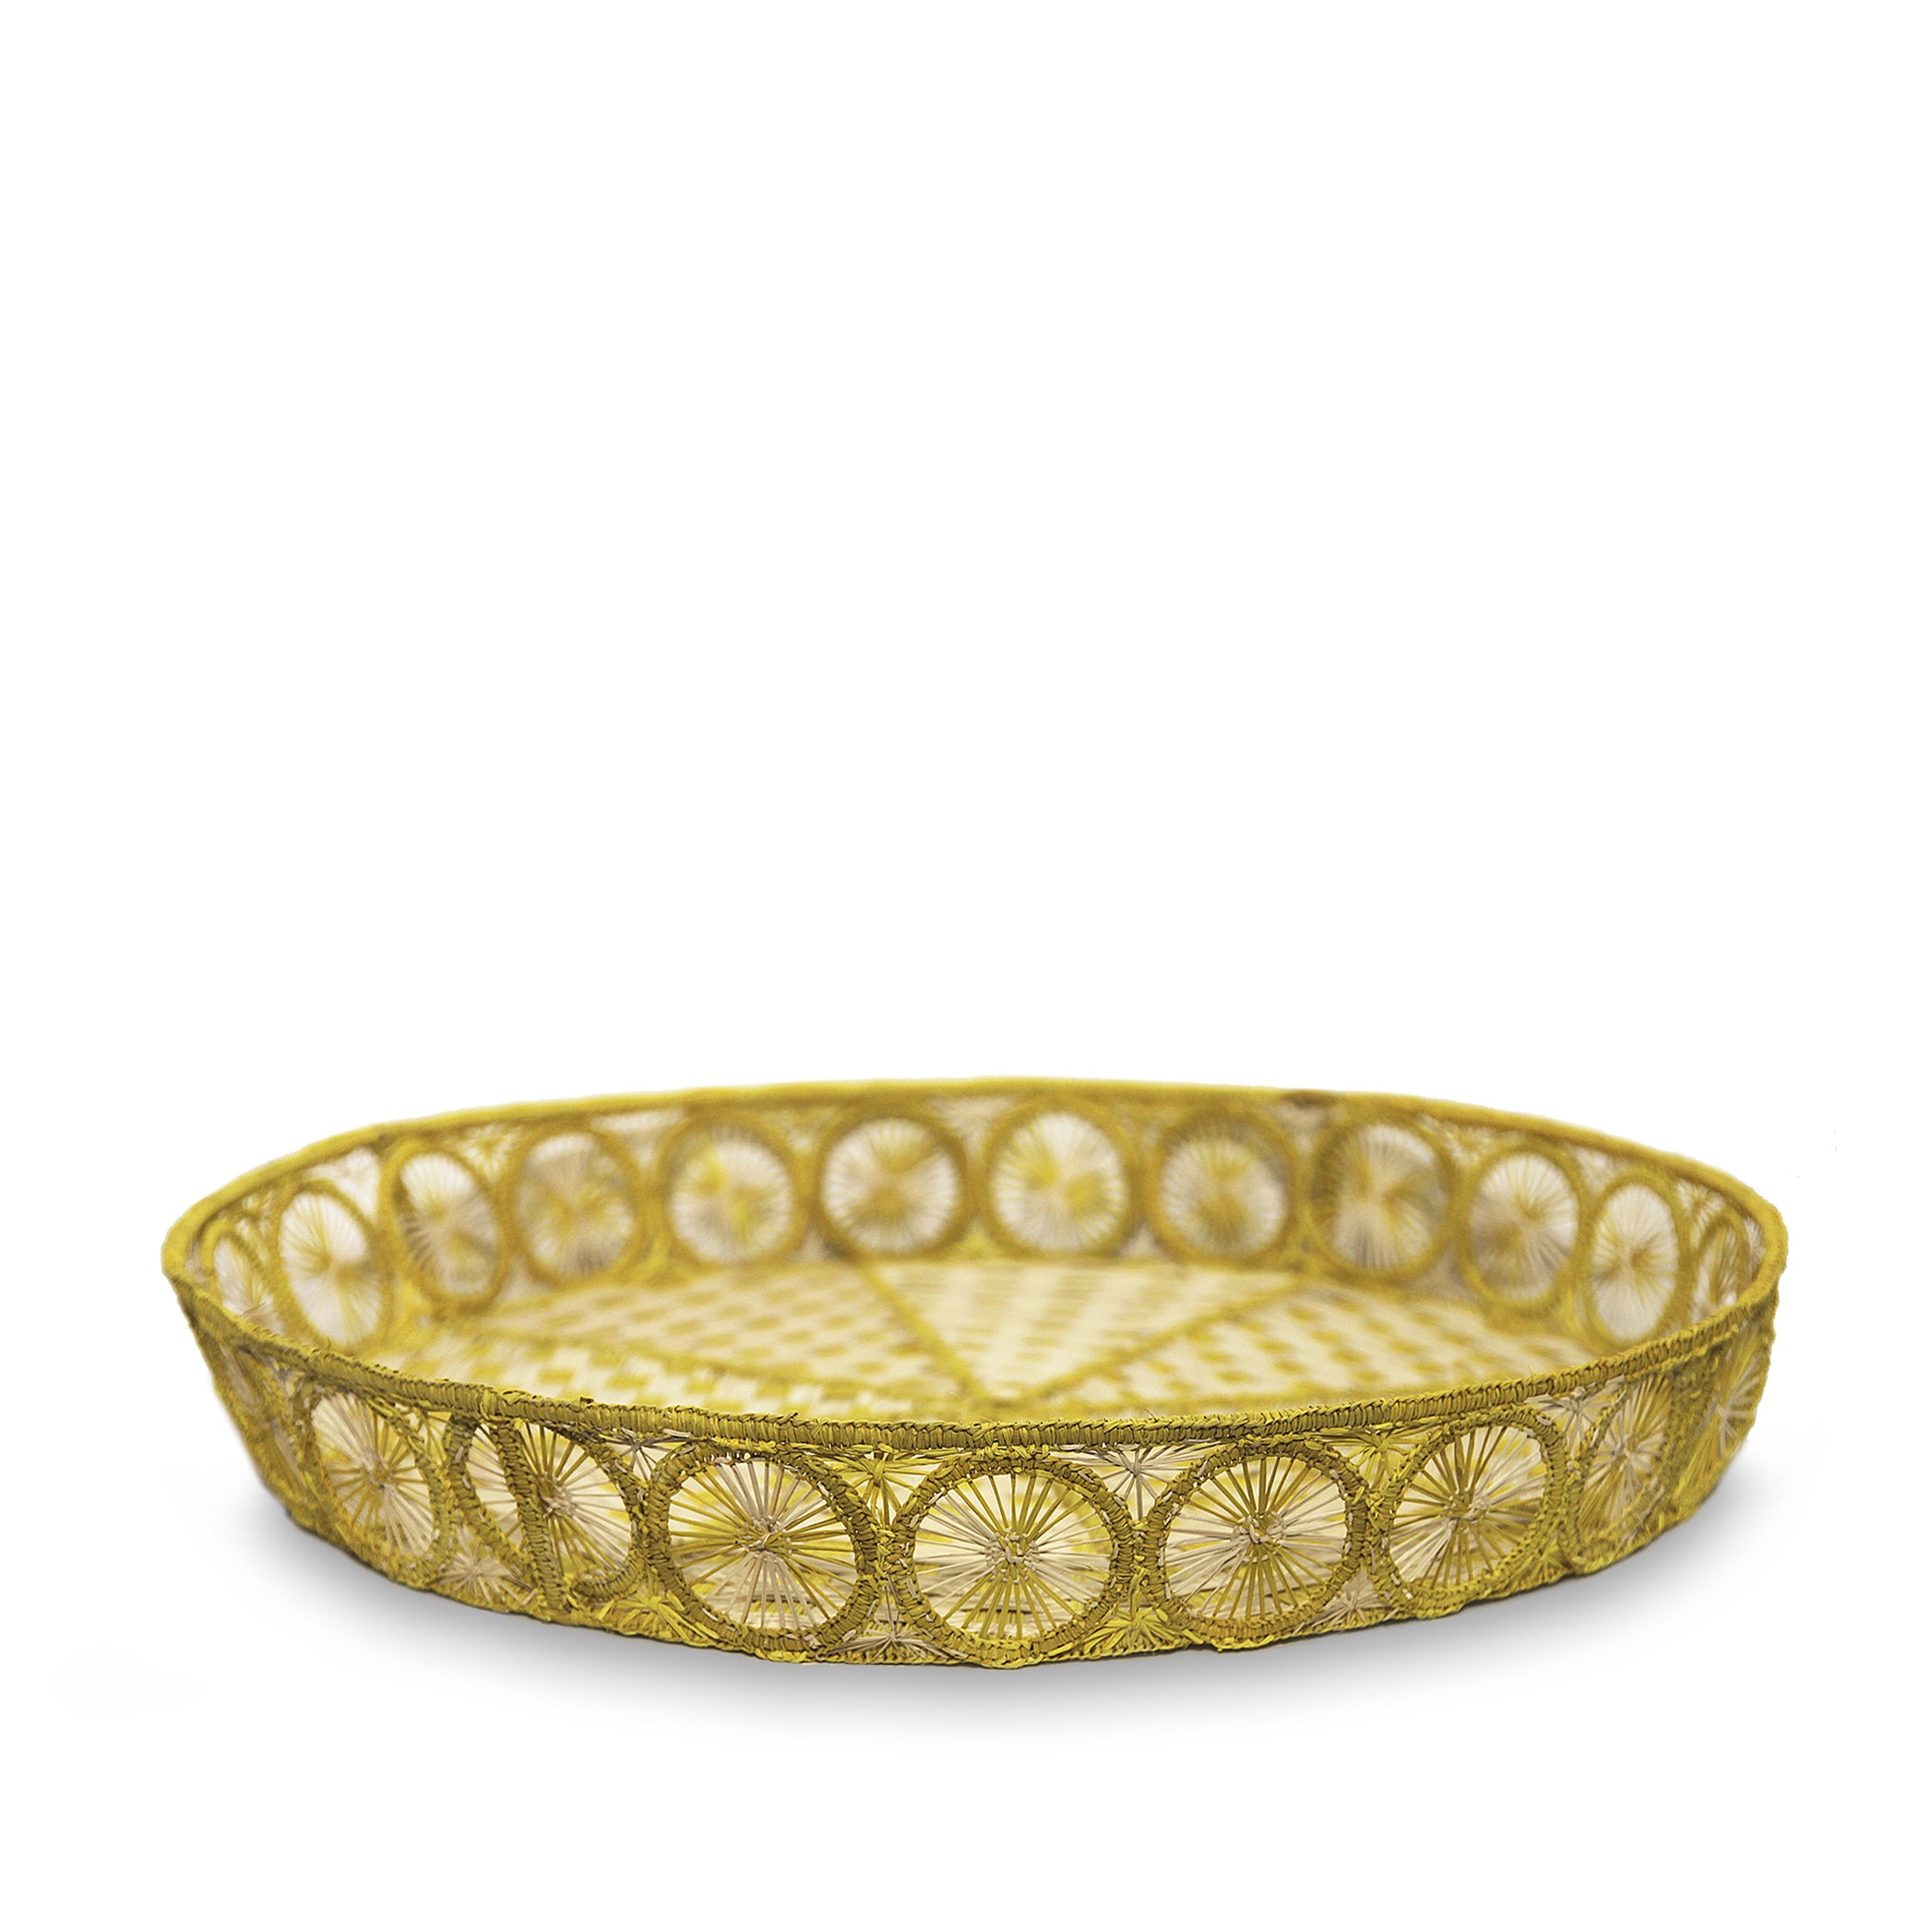 Handwoven Round Tray in Natural and Yellow, 50cm